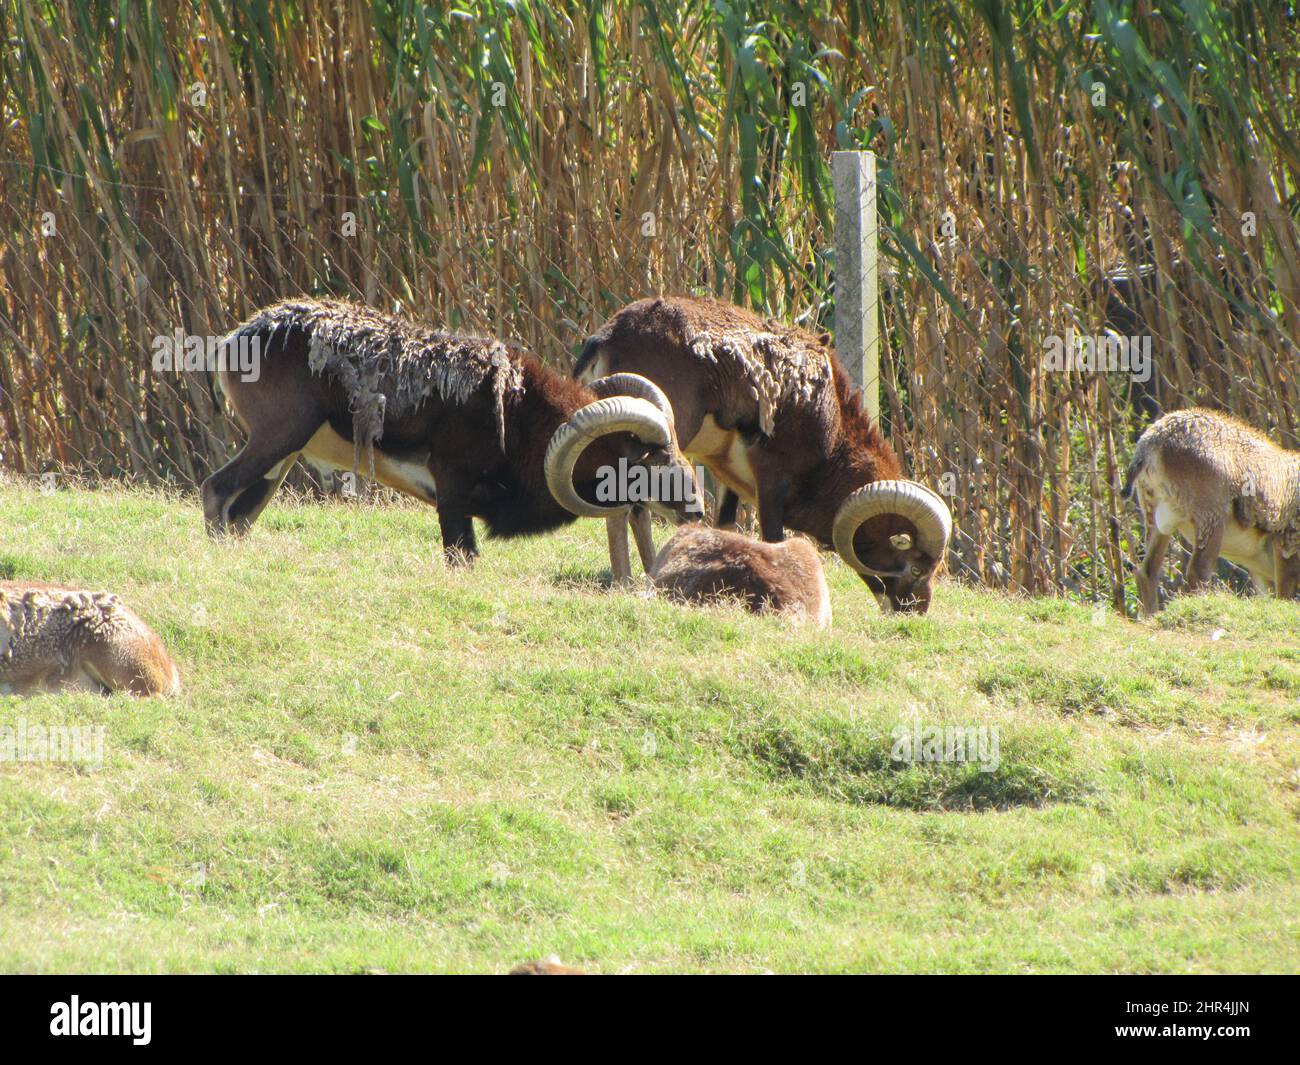 Wild sheep, Rams with horns eating grass with reeds in the background in the sun Stock Photo